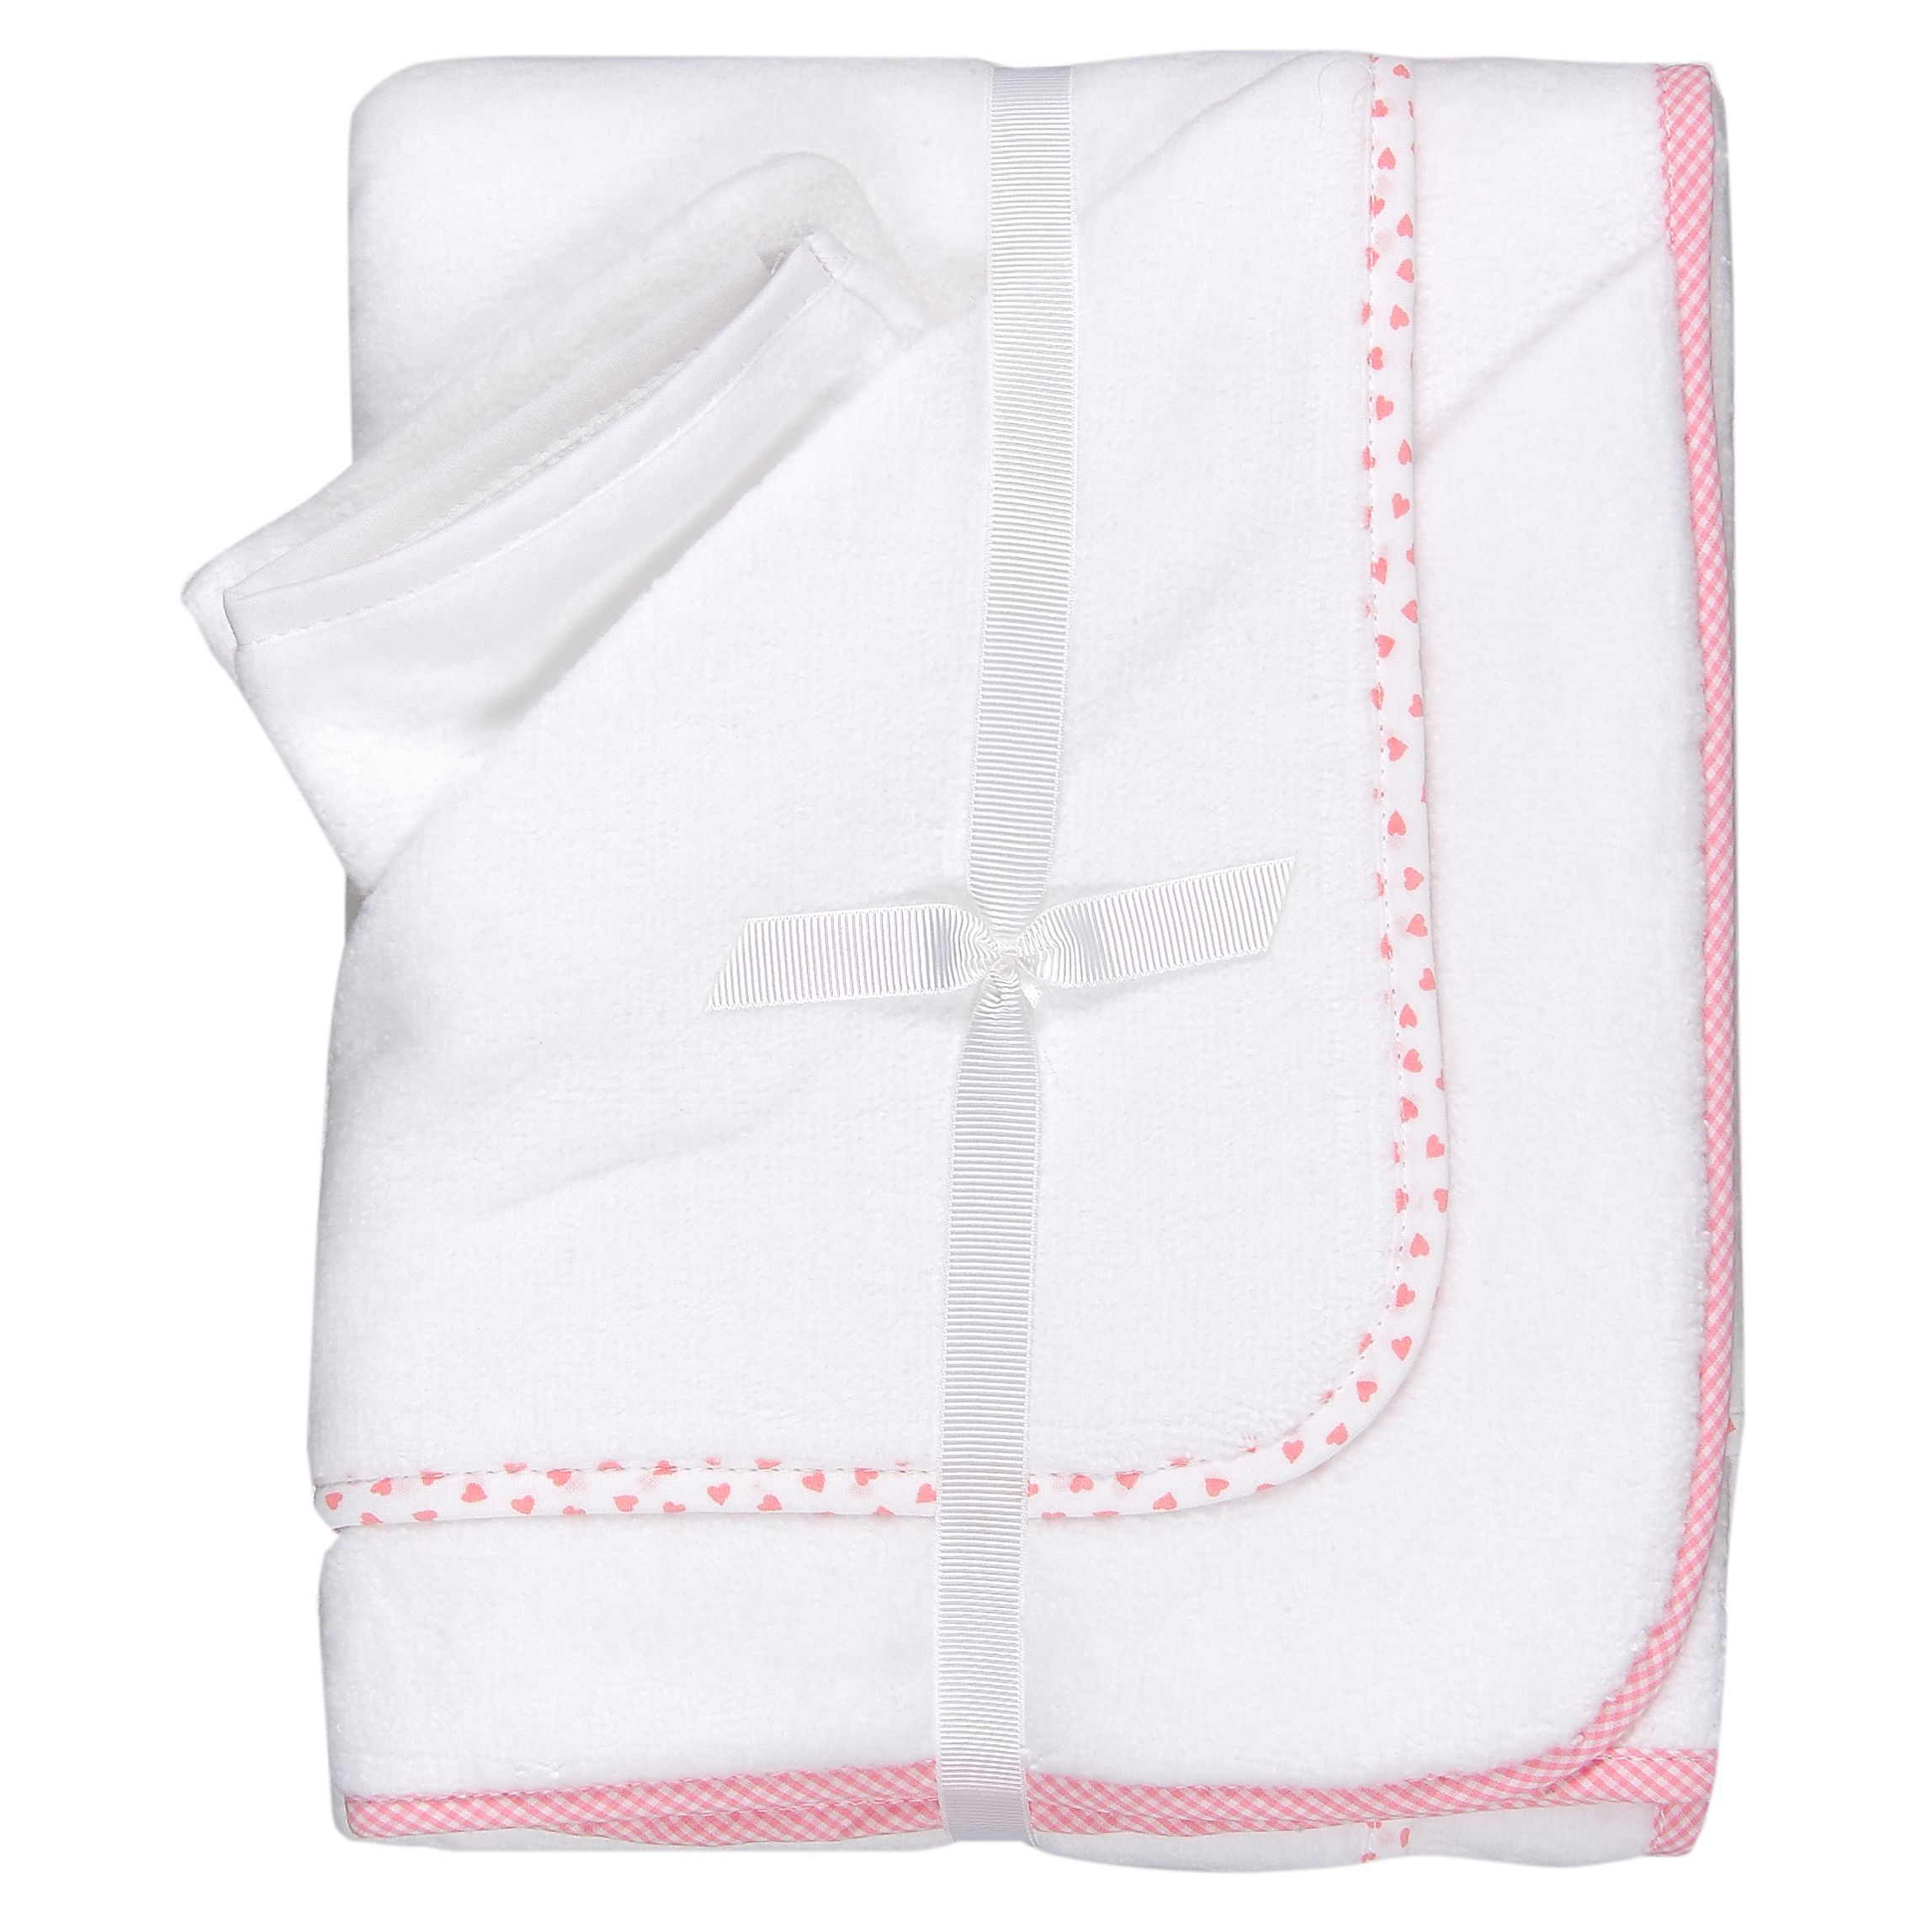 Cuddlerobes, Pack of 2, White and Pink